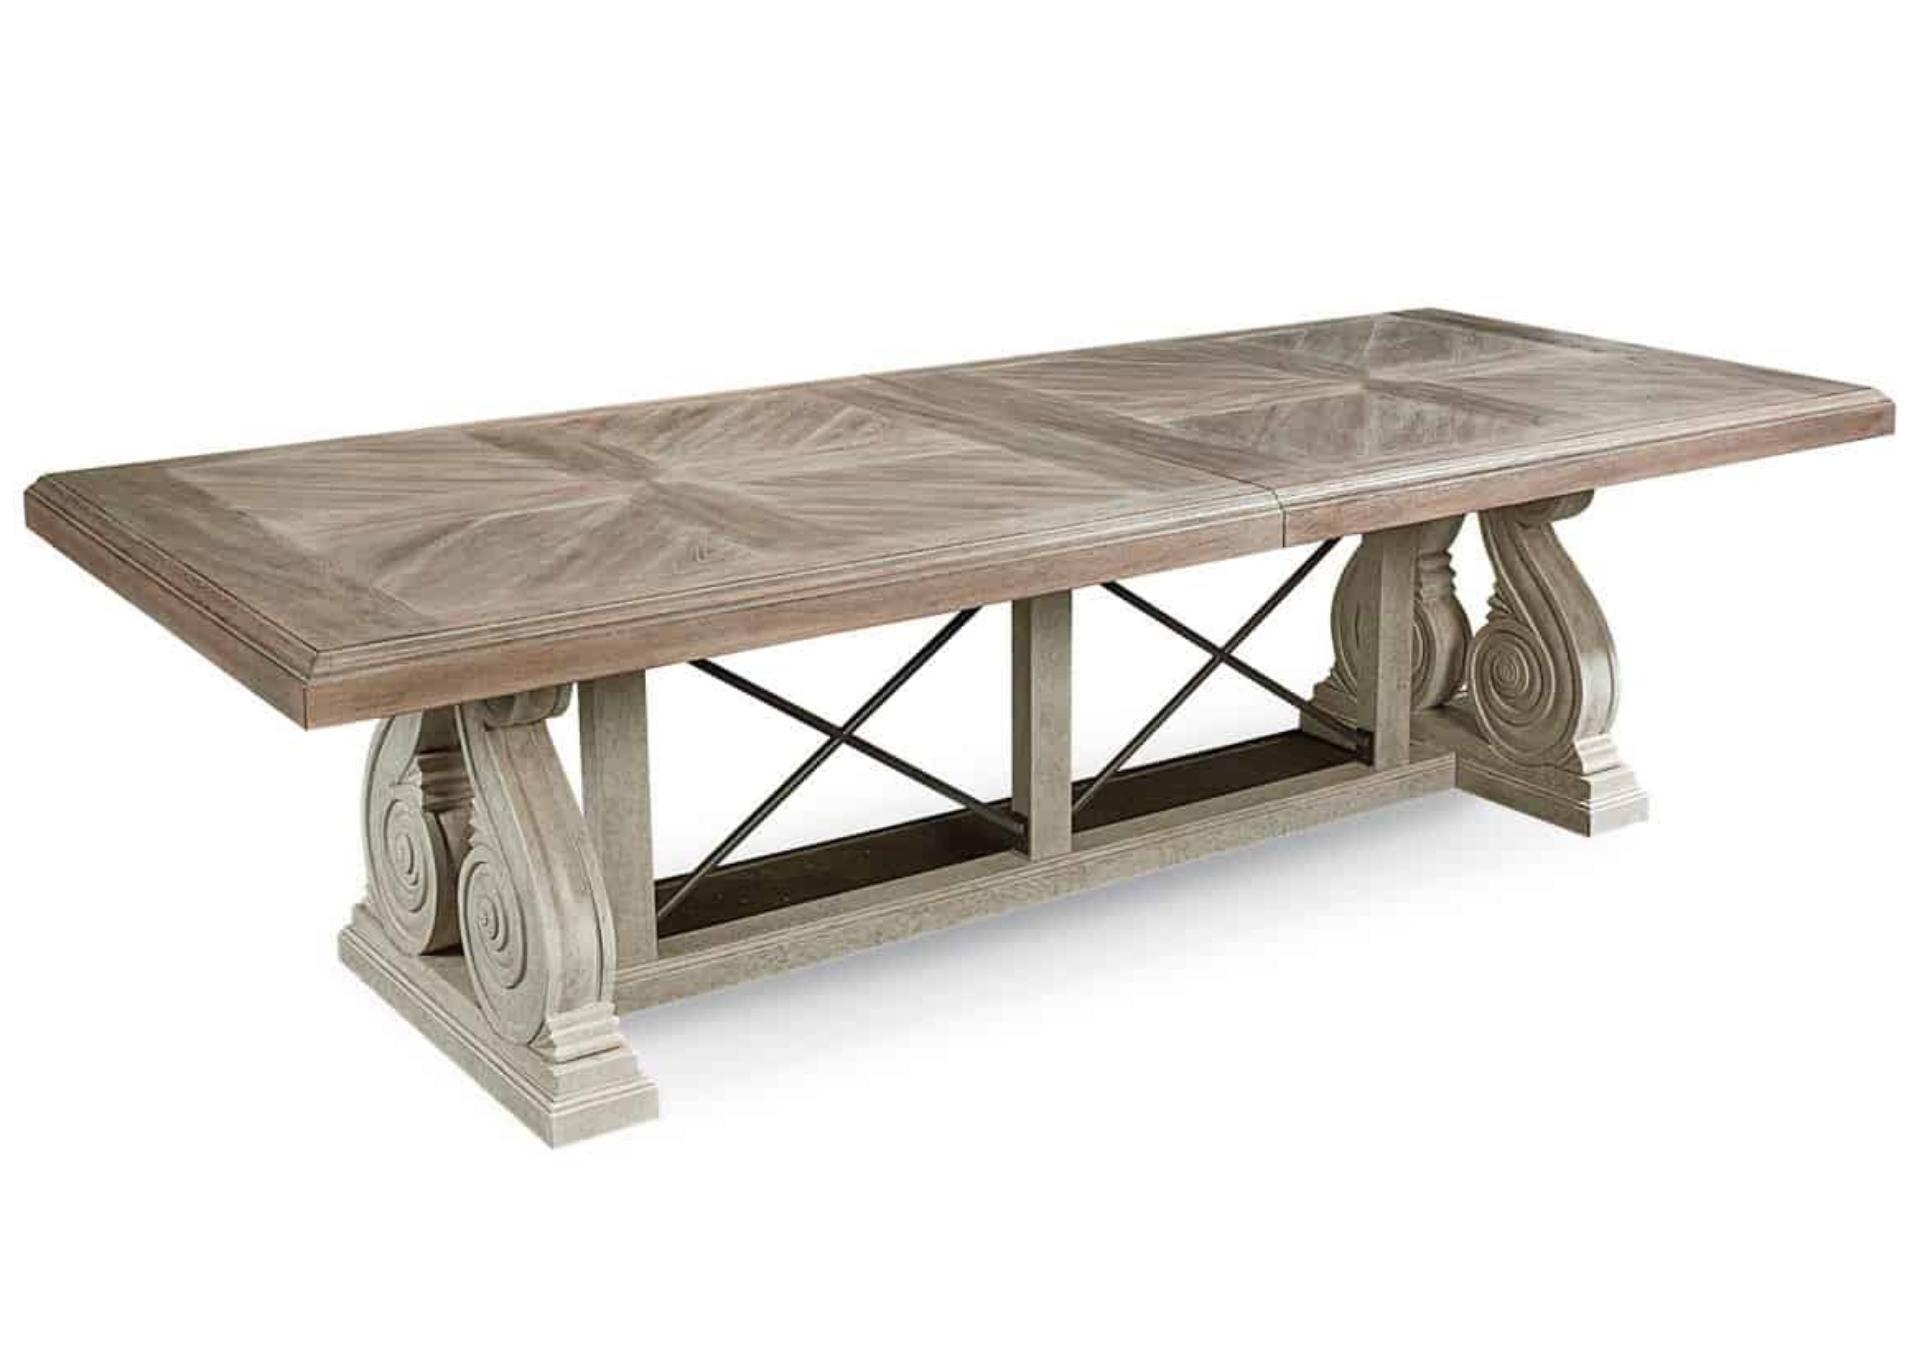 ARCH SALVAGE PEARCE TABLE